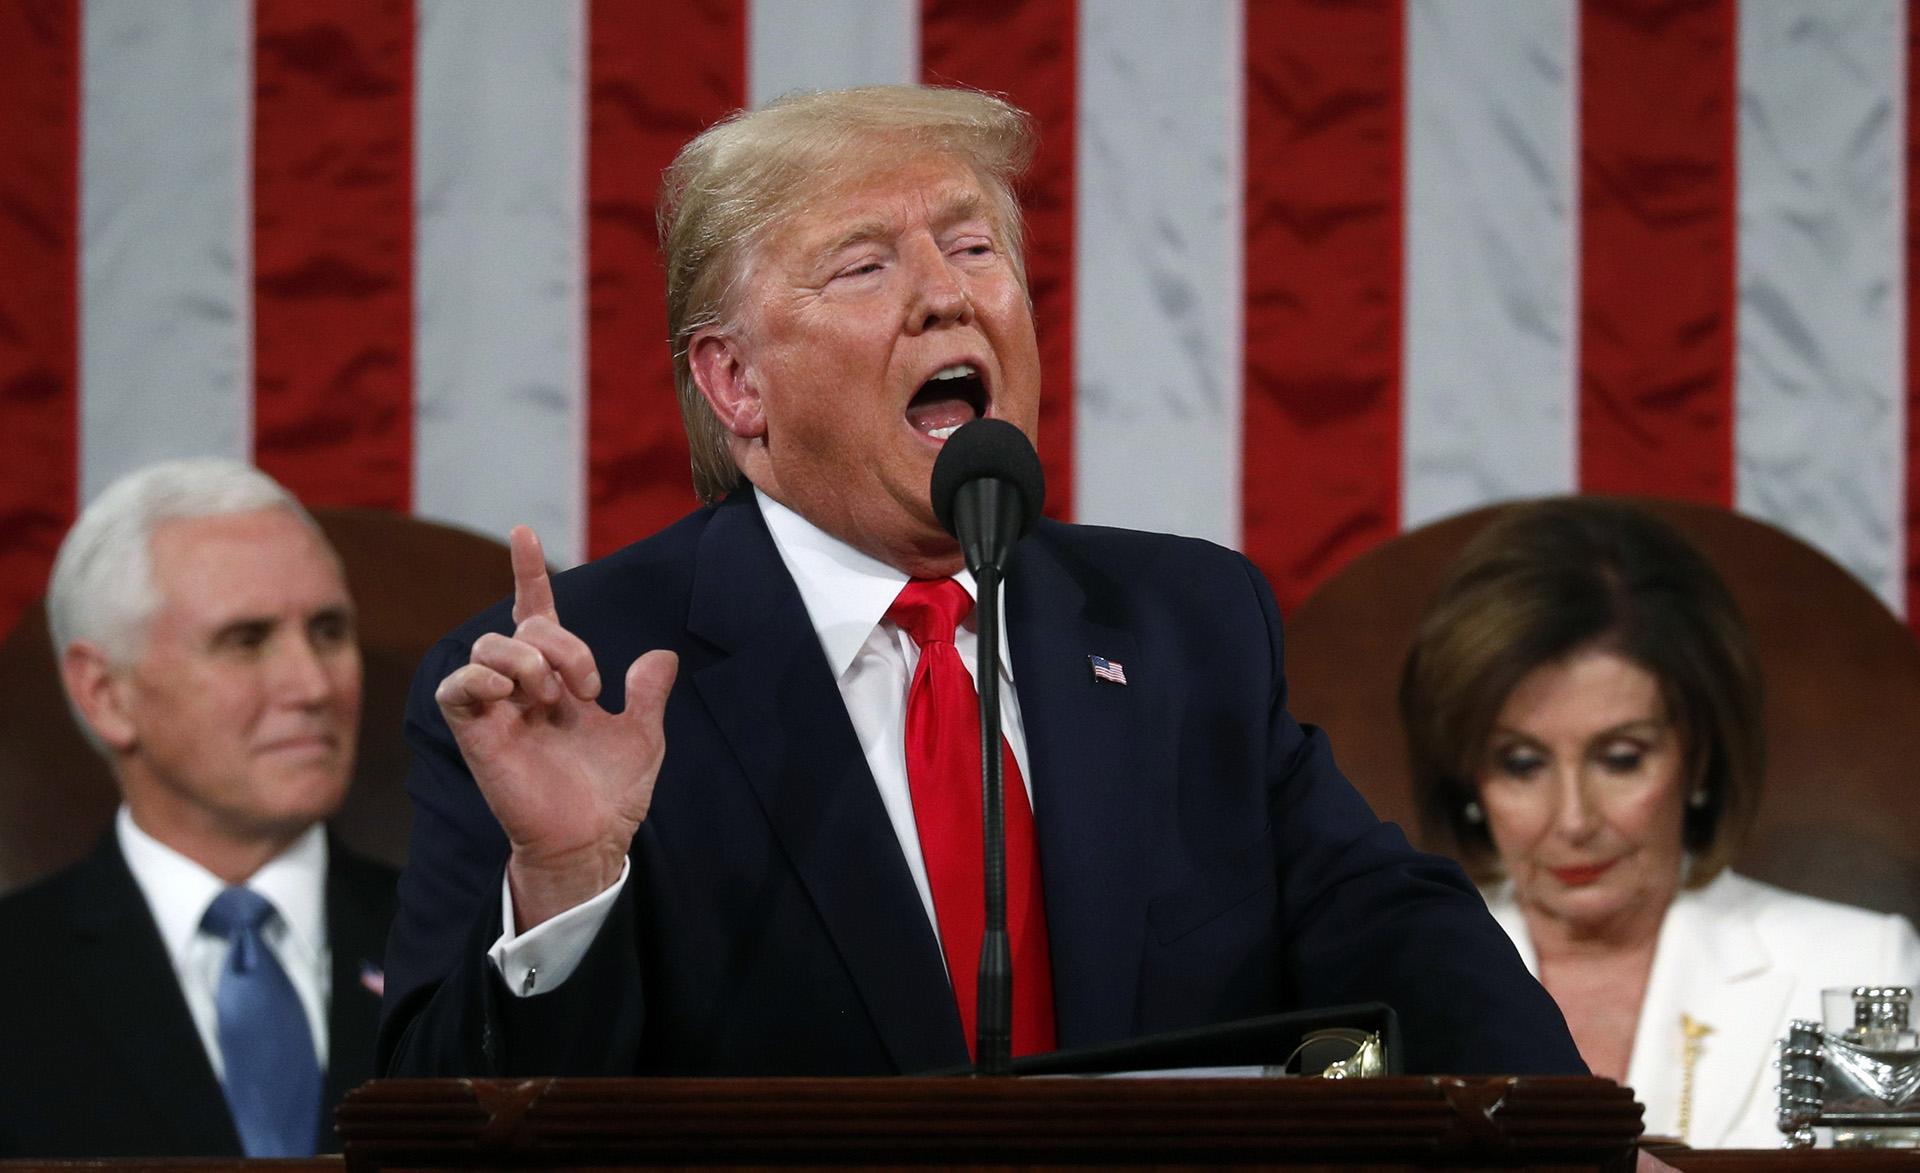 President Donald Trump delivers his State of the Union address to a joint session of Congress in the House Chamber on Capitol Hill in Washington, Tuesday, Feb. 4, 2020, as Vice President Mike Pence and Speaker Nancy Pelosi look on. (Leah Millis / Pool via AP)